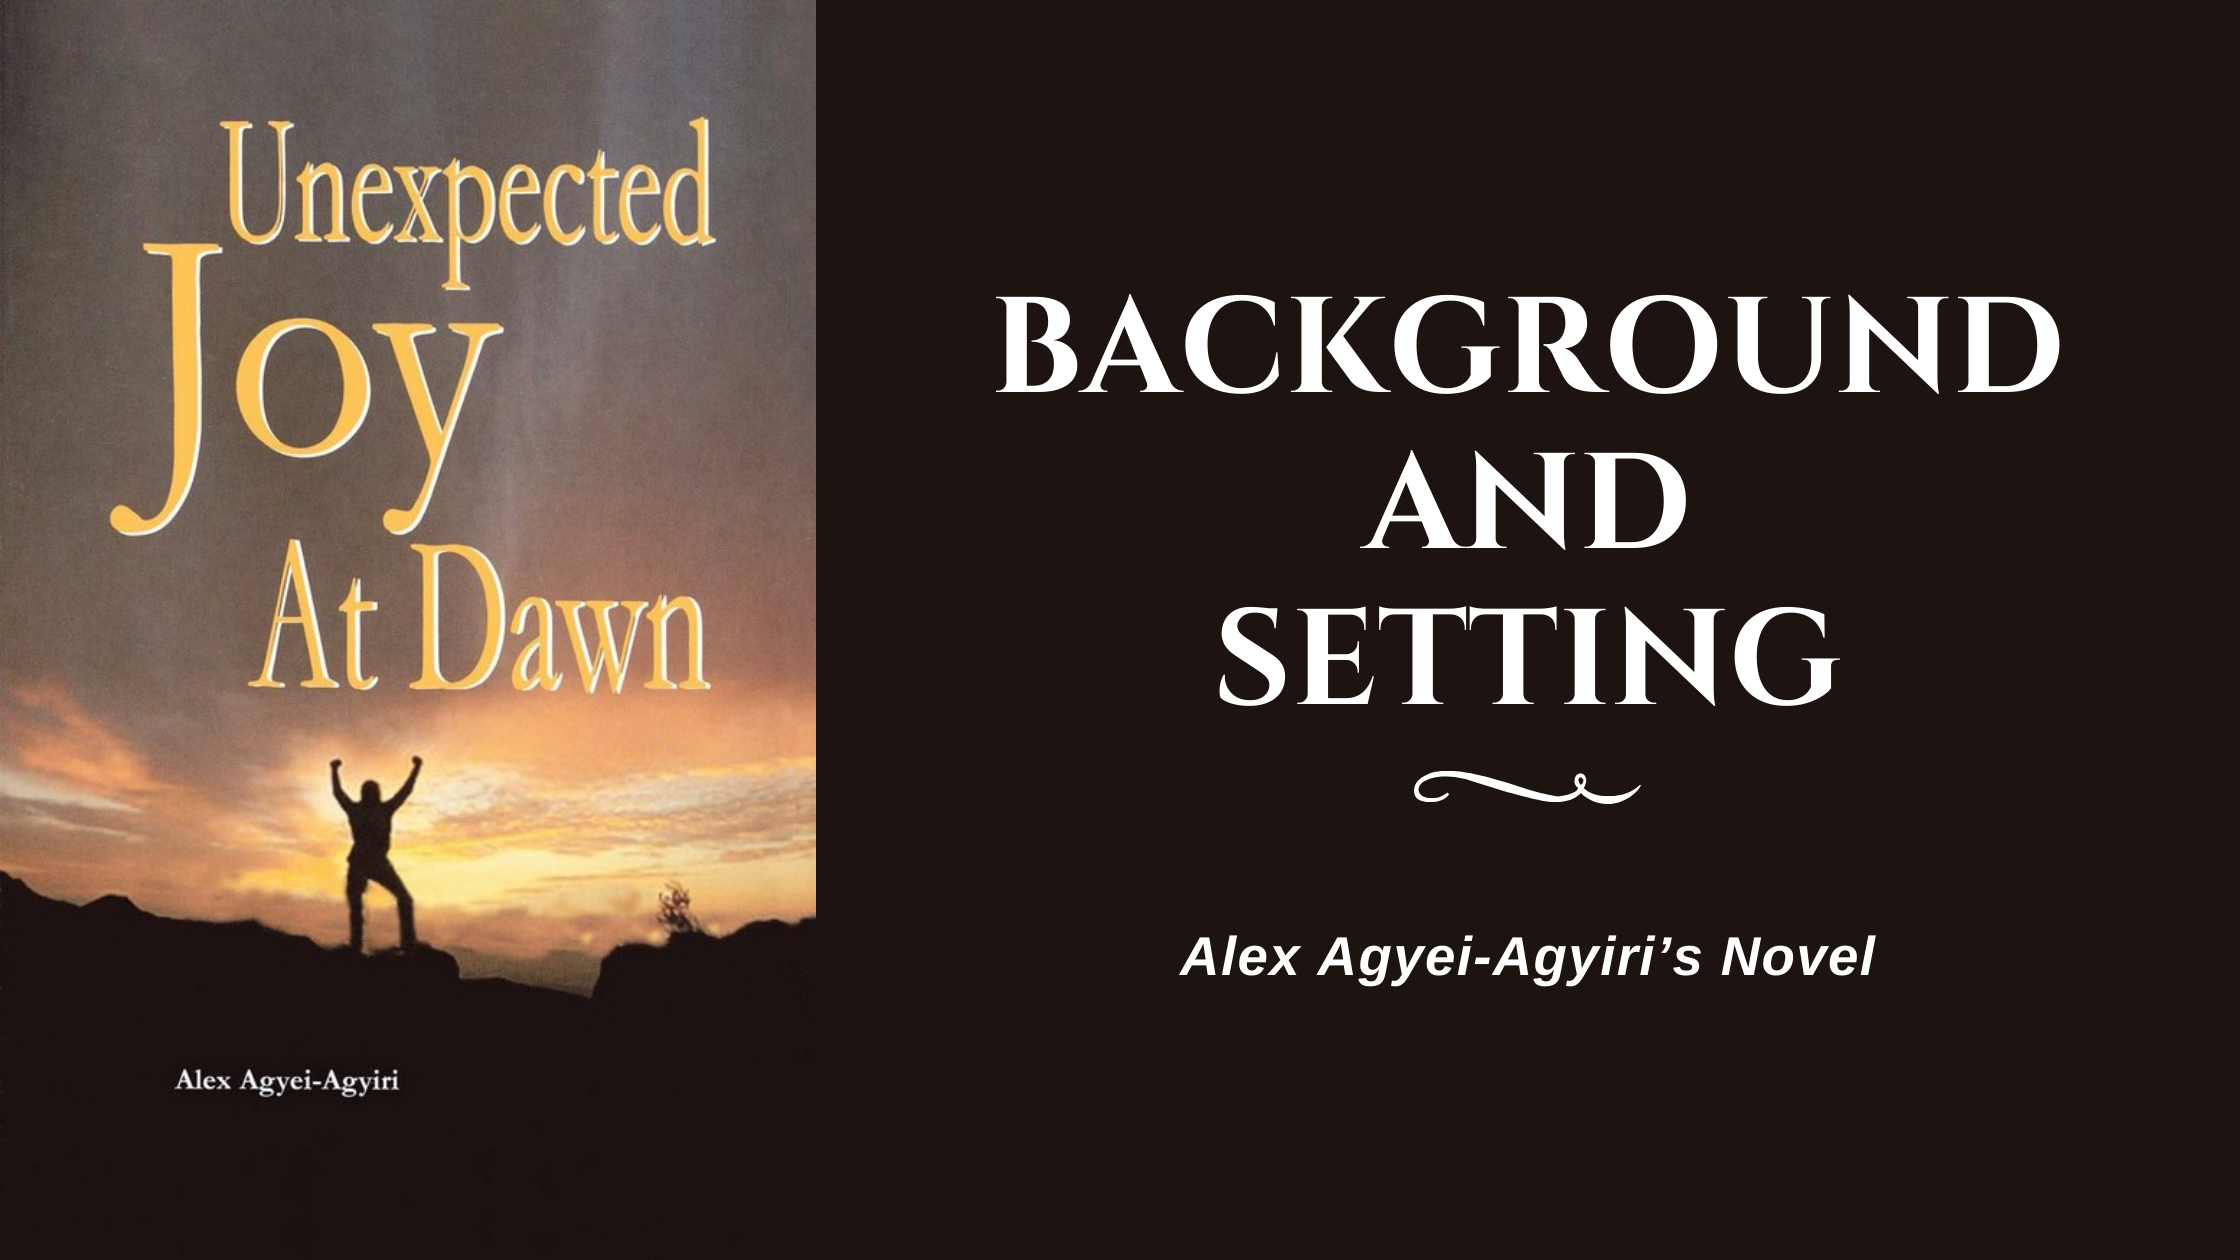 Background and Settings in The Unexpected Joy at Dawn by Alex Agyei-Agyiri